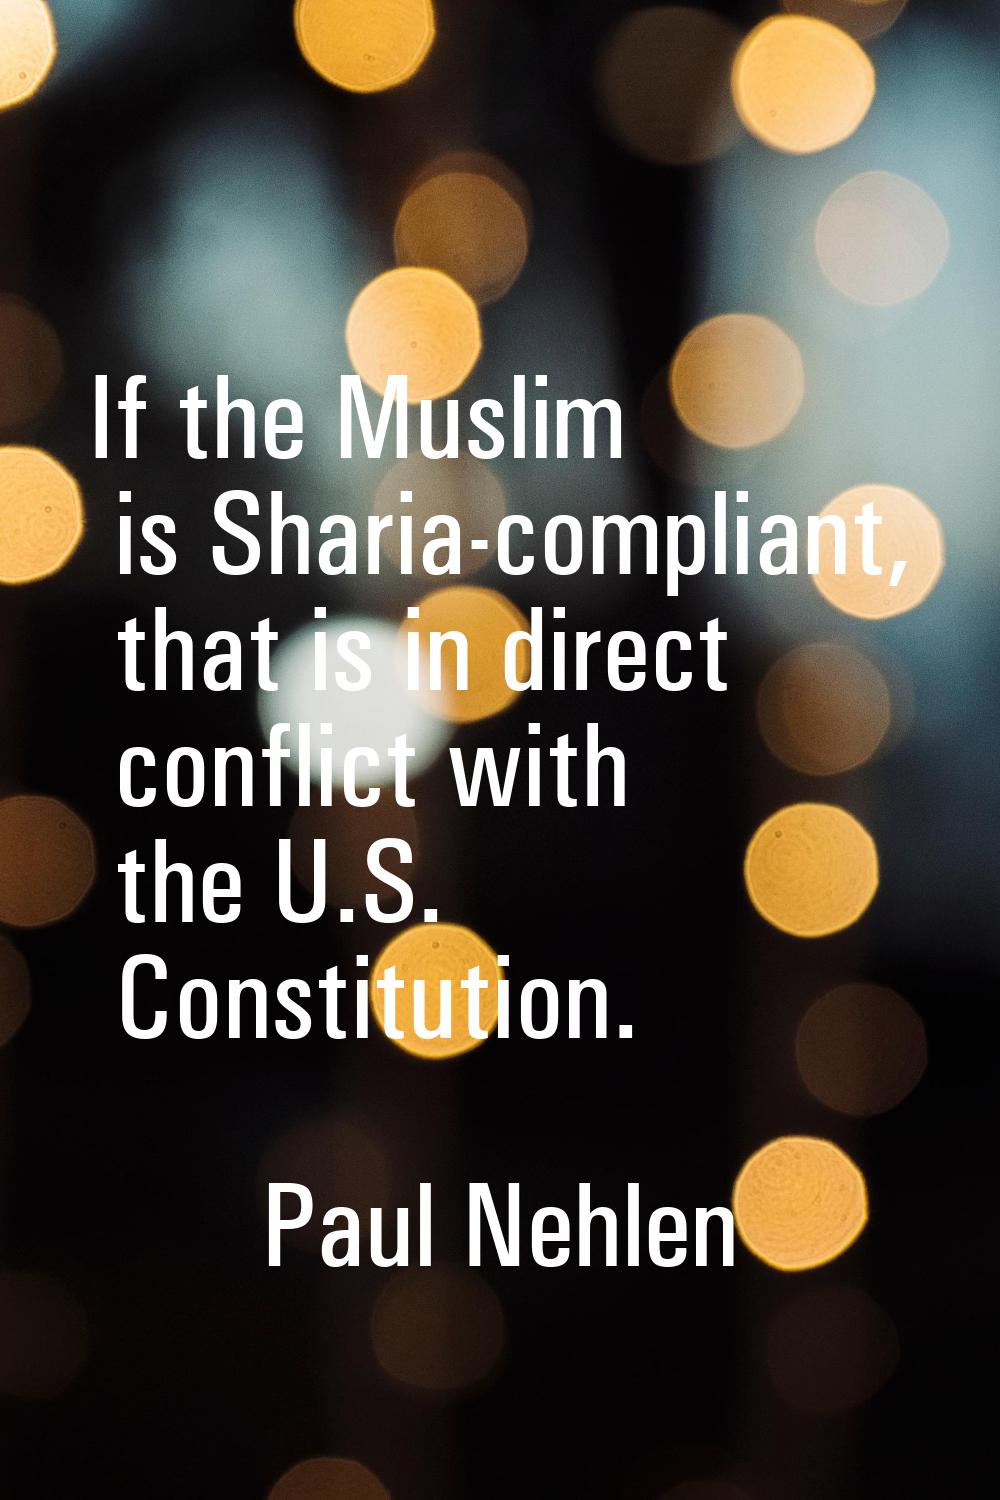 If the Muslim is Sharia-compliant, that is in direct conflict with the U.S. Constitution.